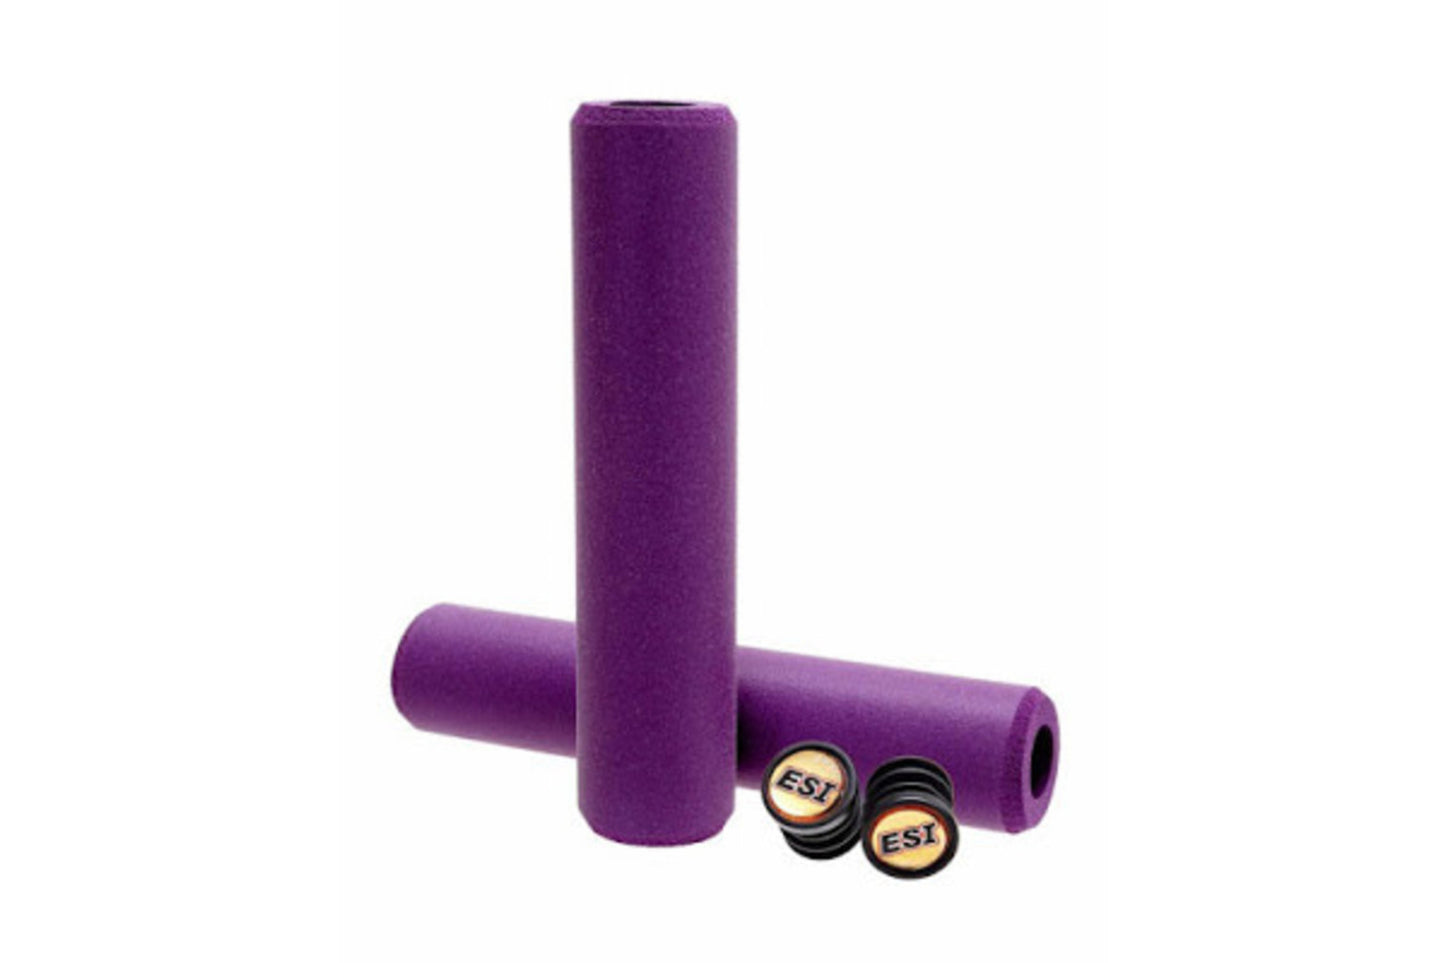 ESI Chunky Grips Excel Sports  Shop Online From Boulder Colorado